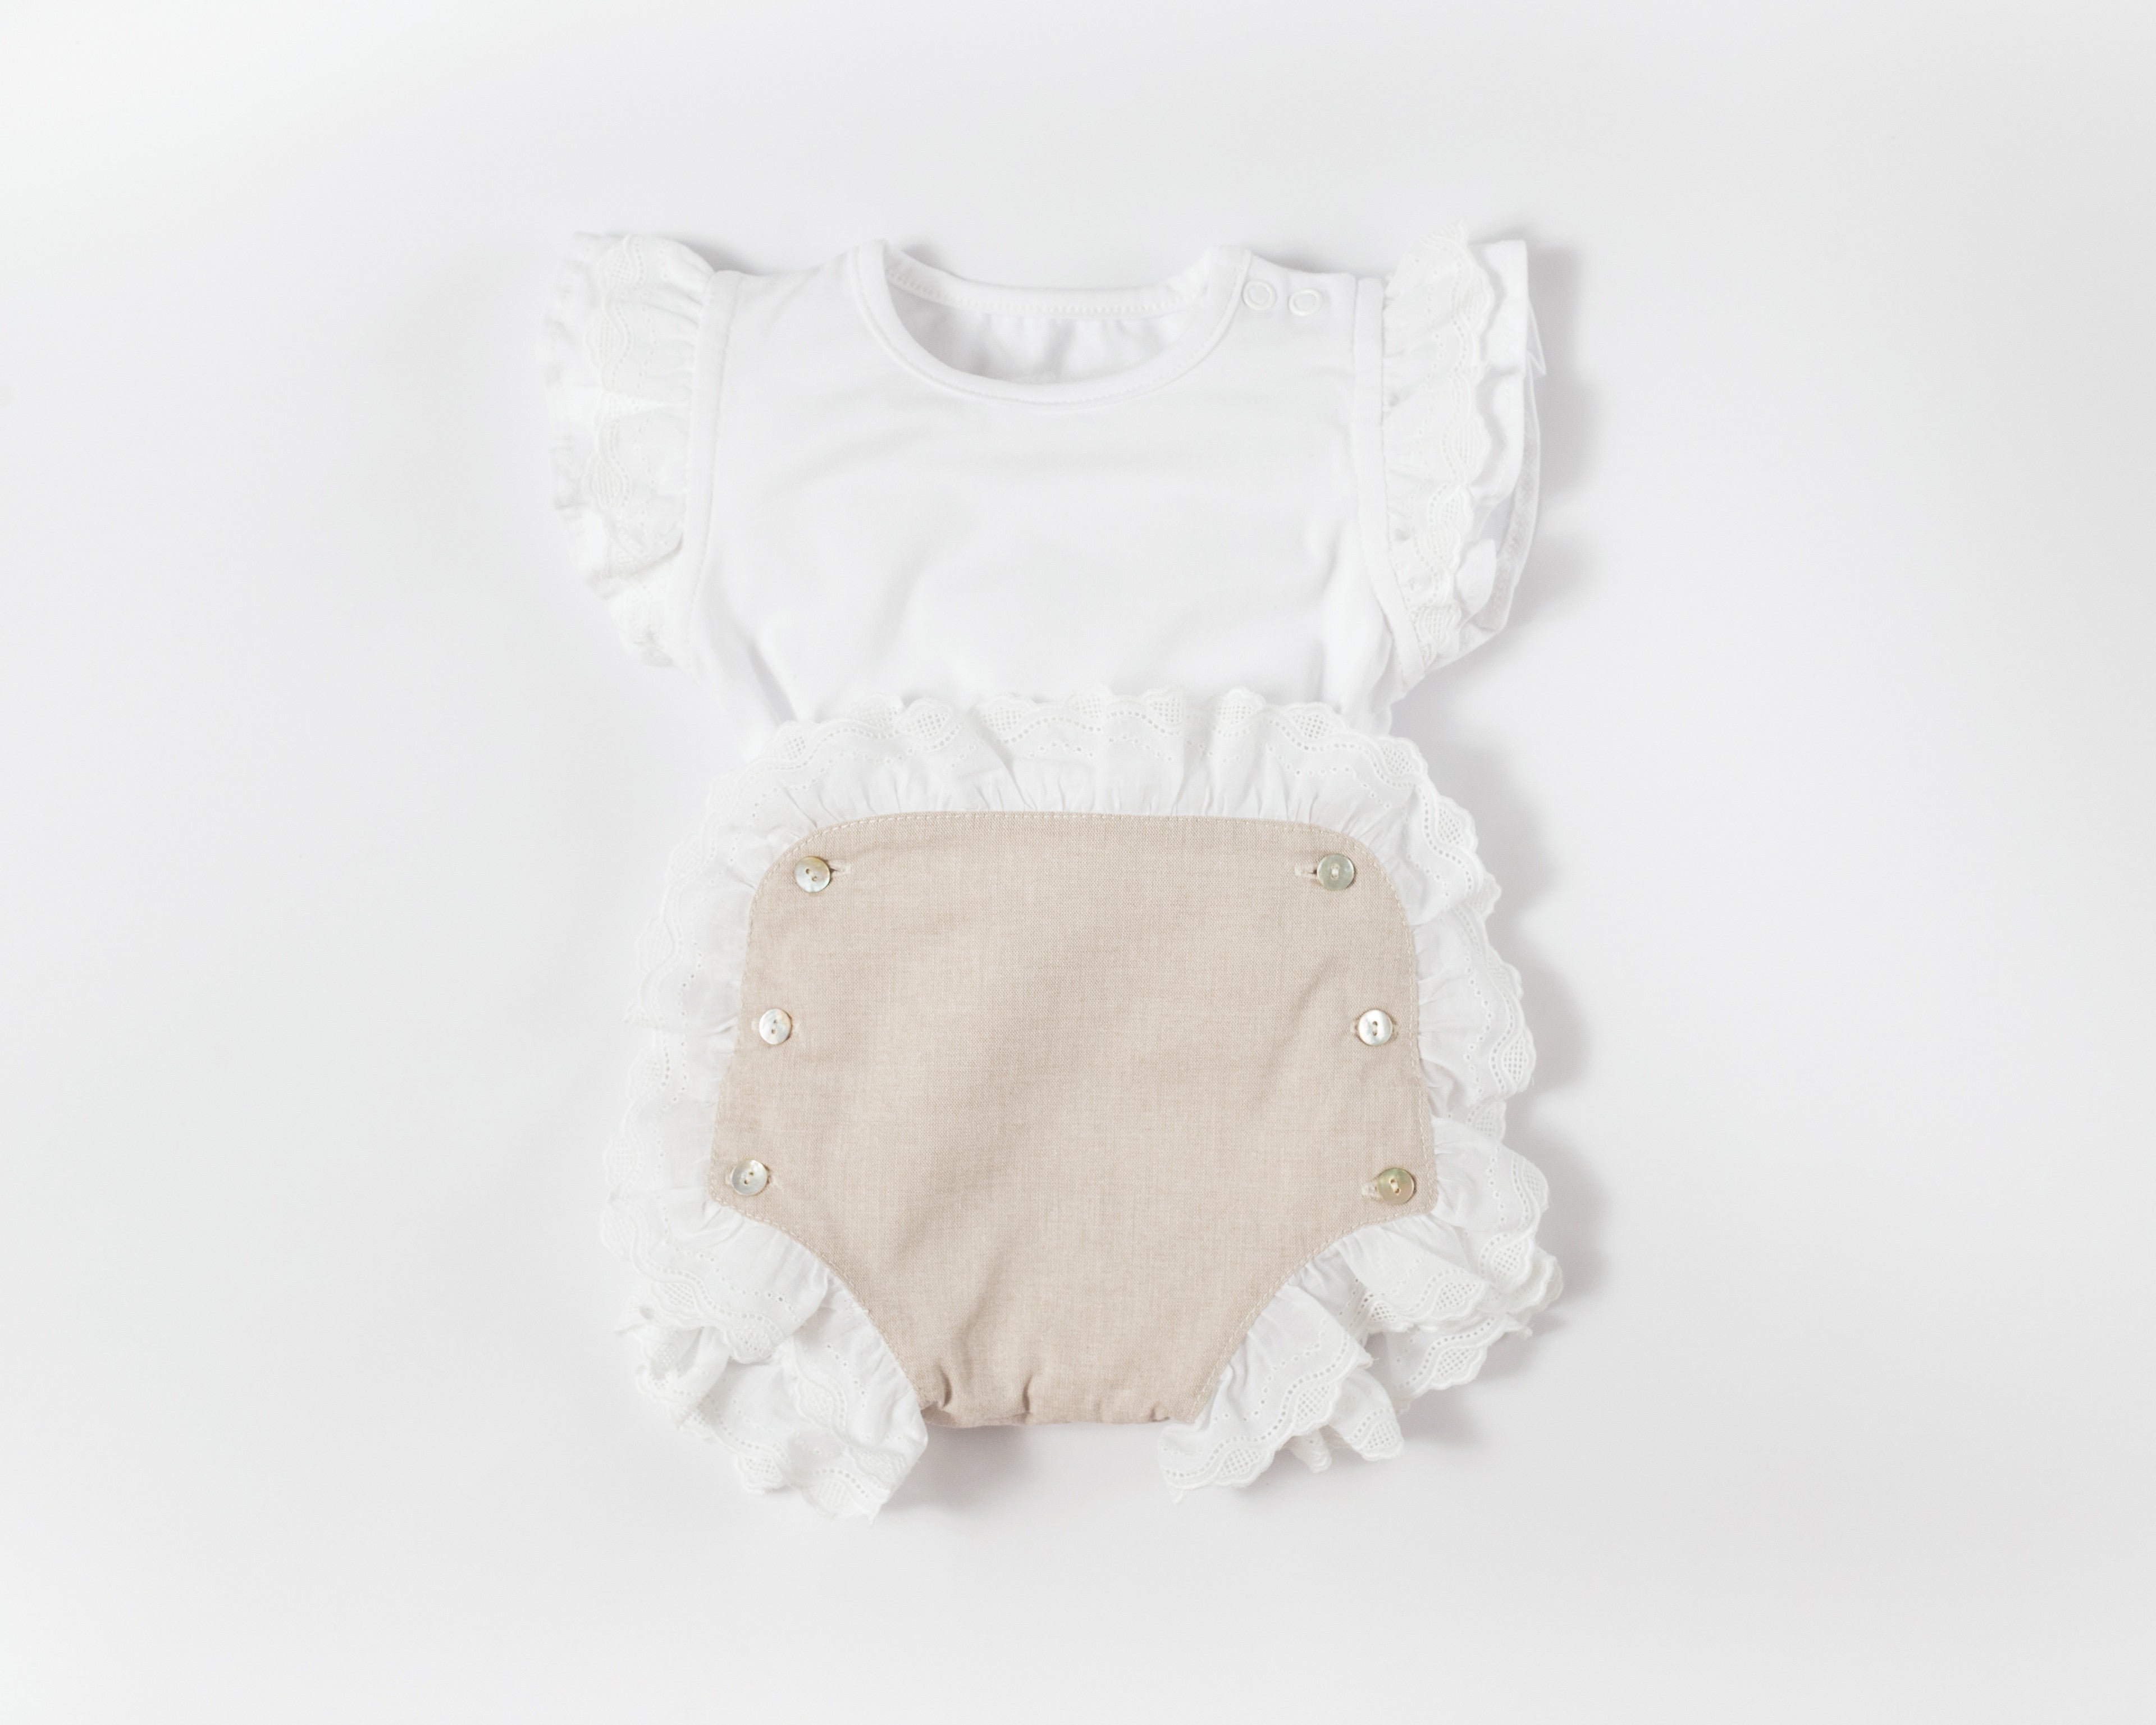 Deolinda - White and Beige Top and Bloomer Set - DBV22640